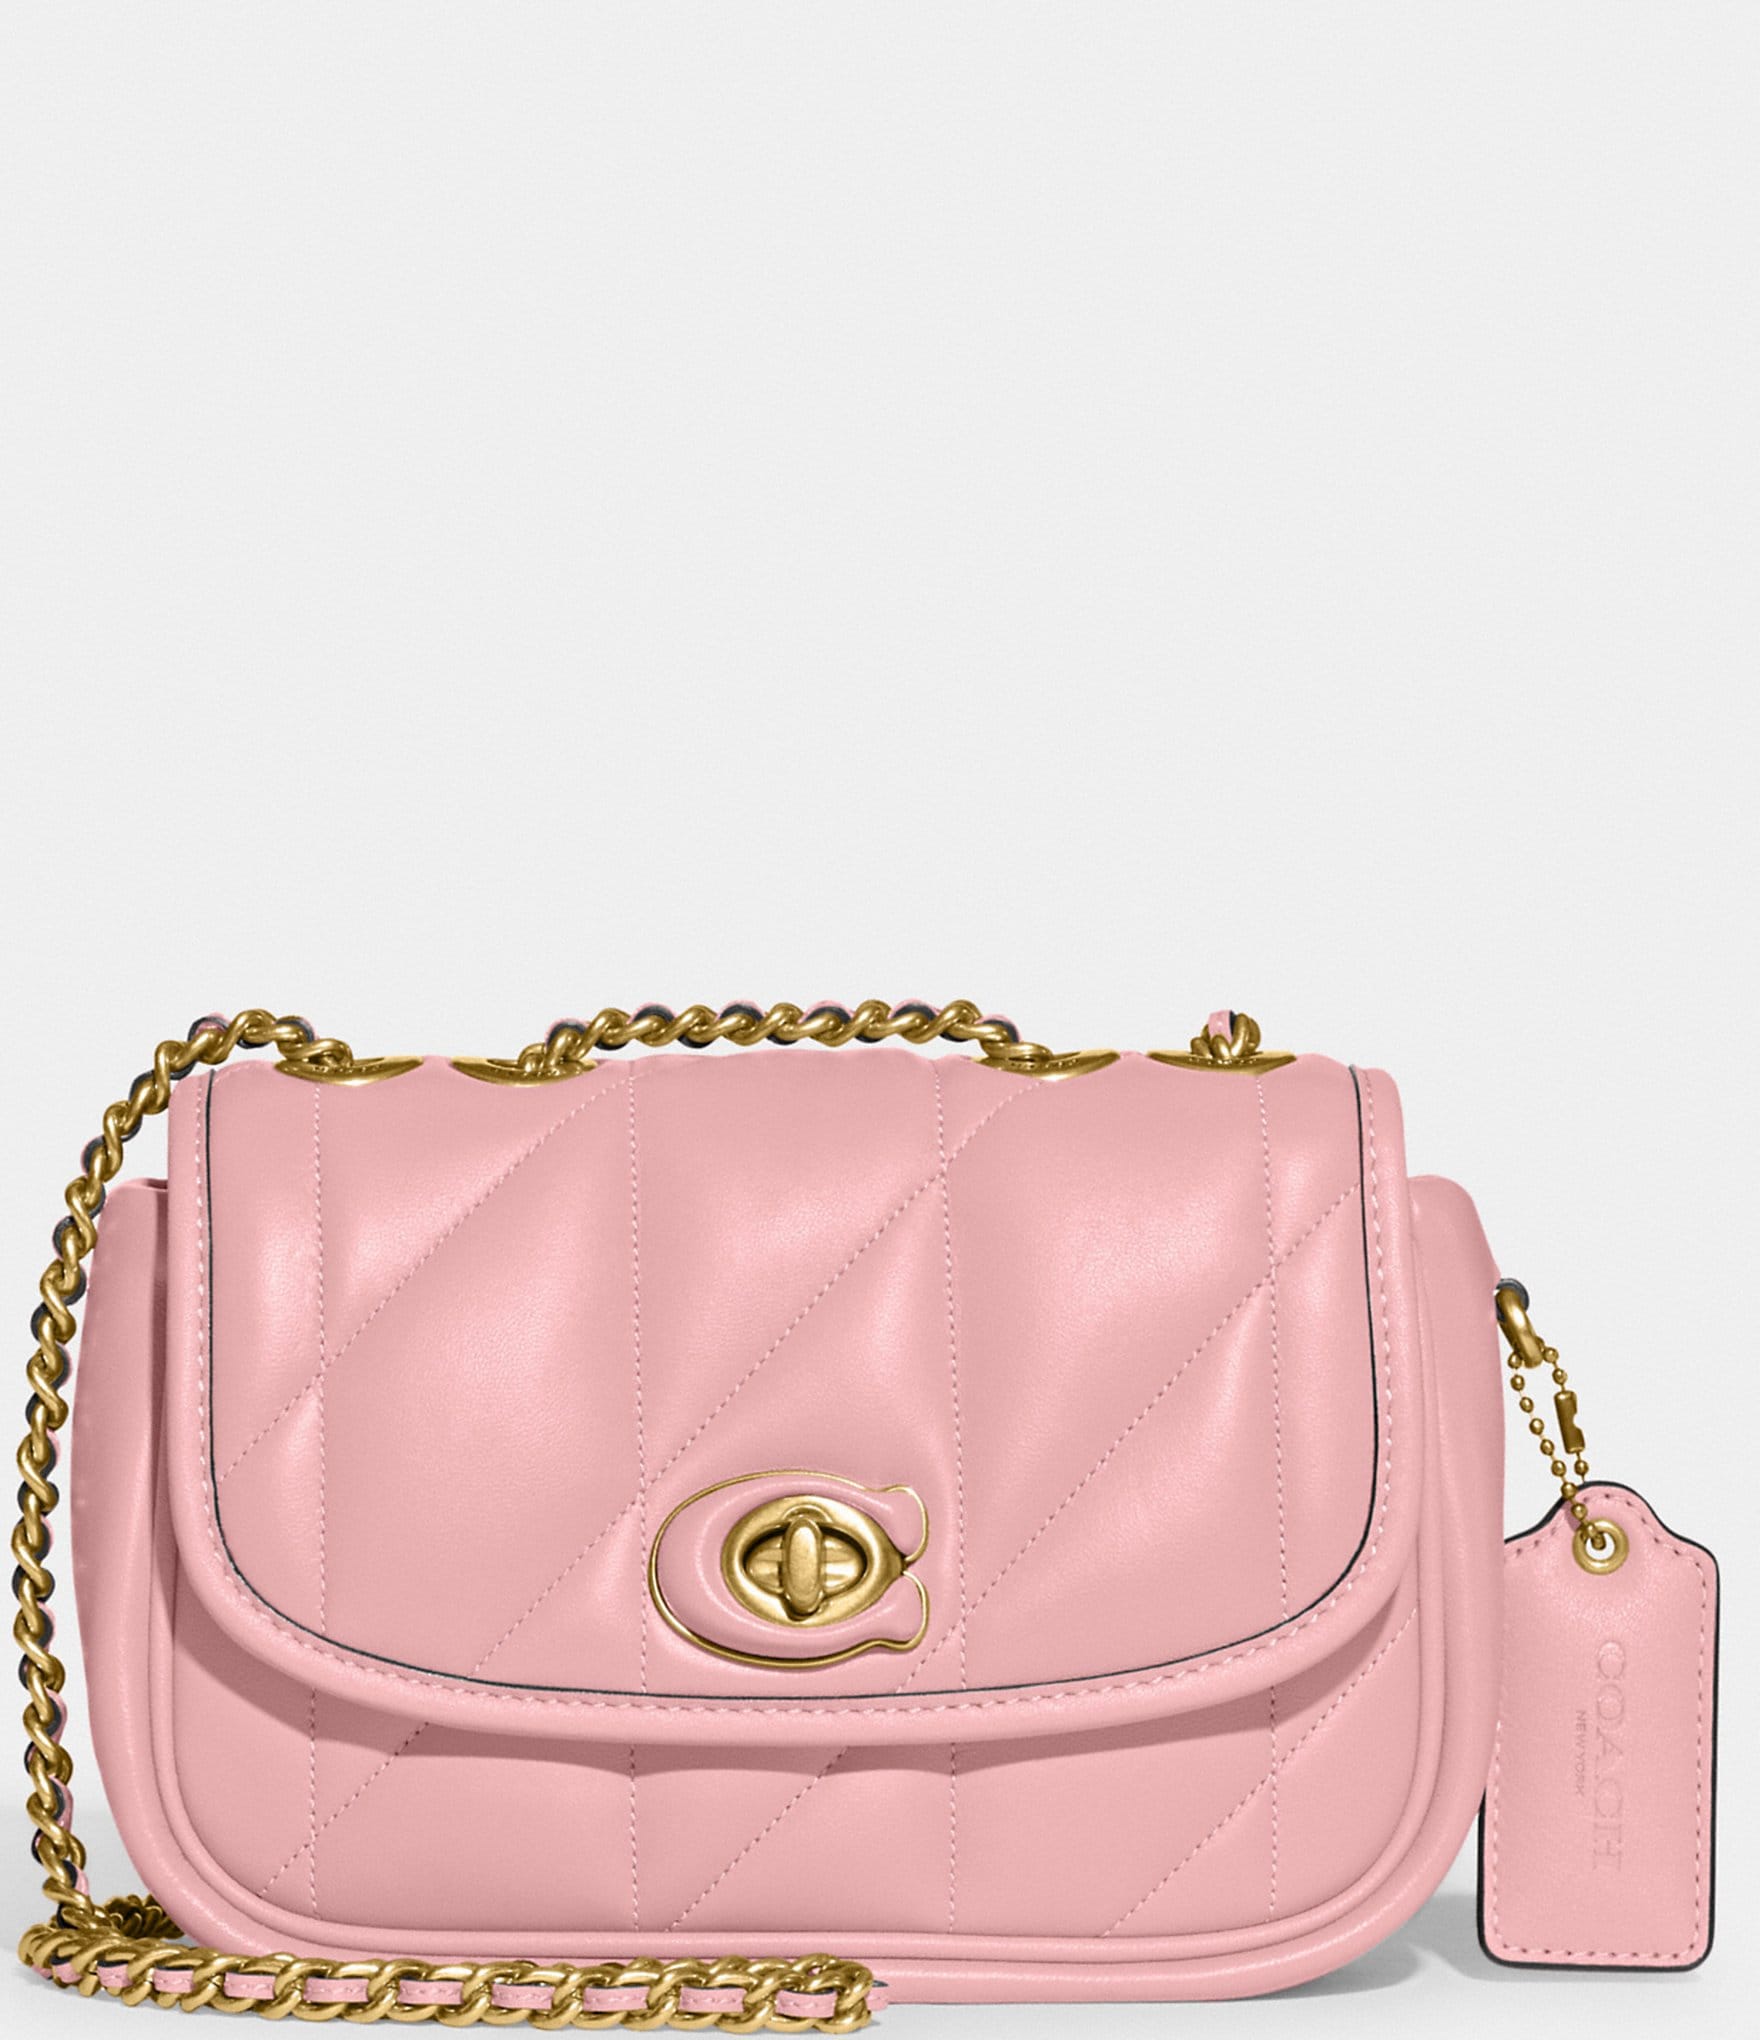 Coach, Bags, Coach Madison Tote Bag Saffiano Leather Pink